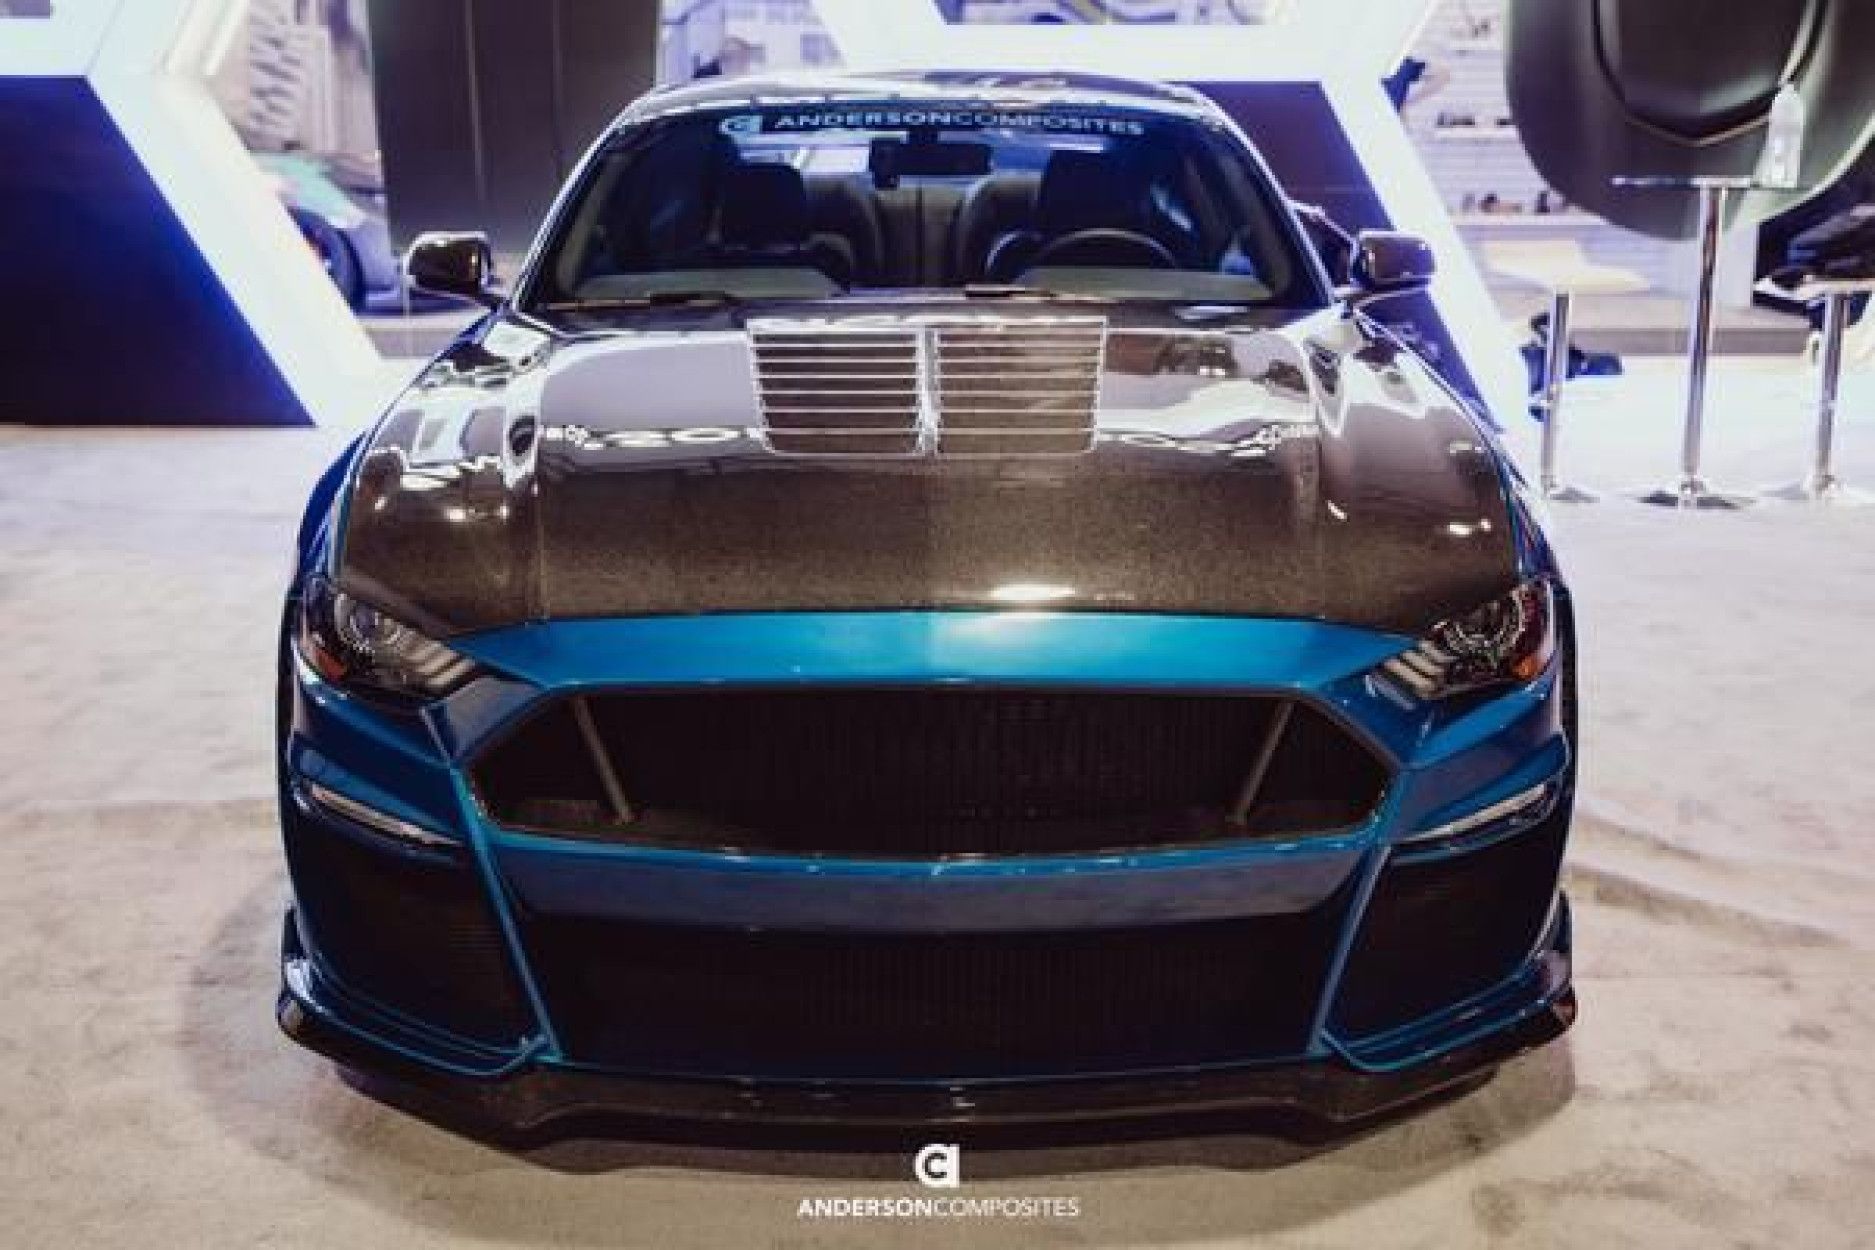 Anderson Composites GFK Frontschürze für Ford Mustang 2018+ Type ST (GT500 Style) (7) 